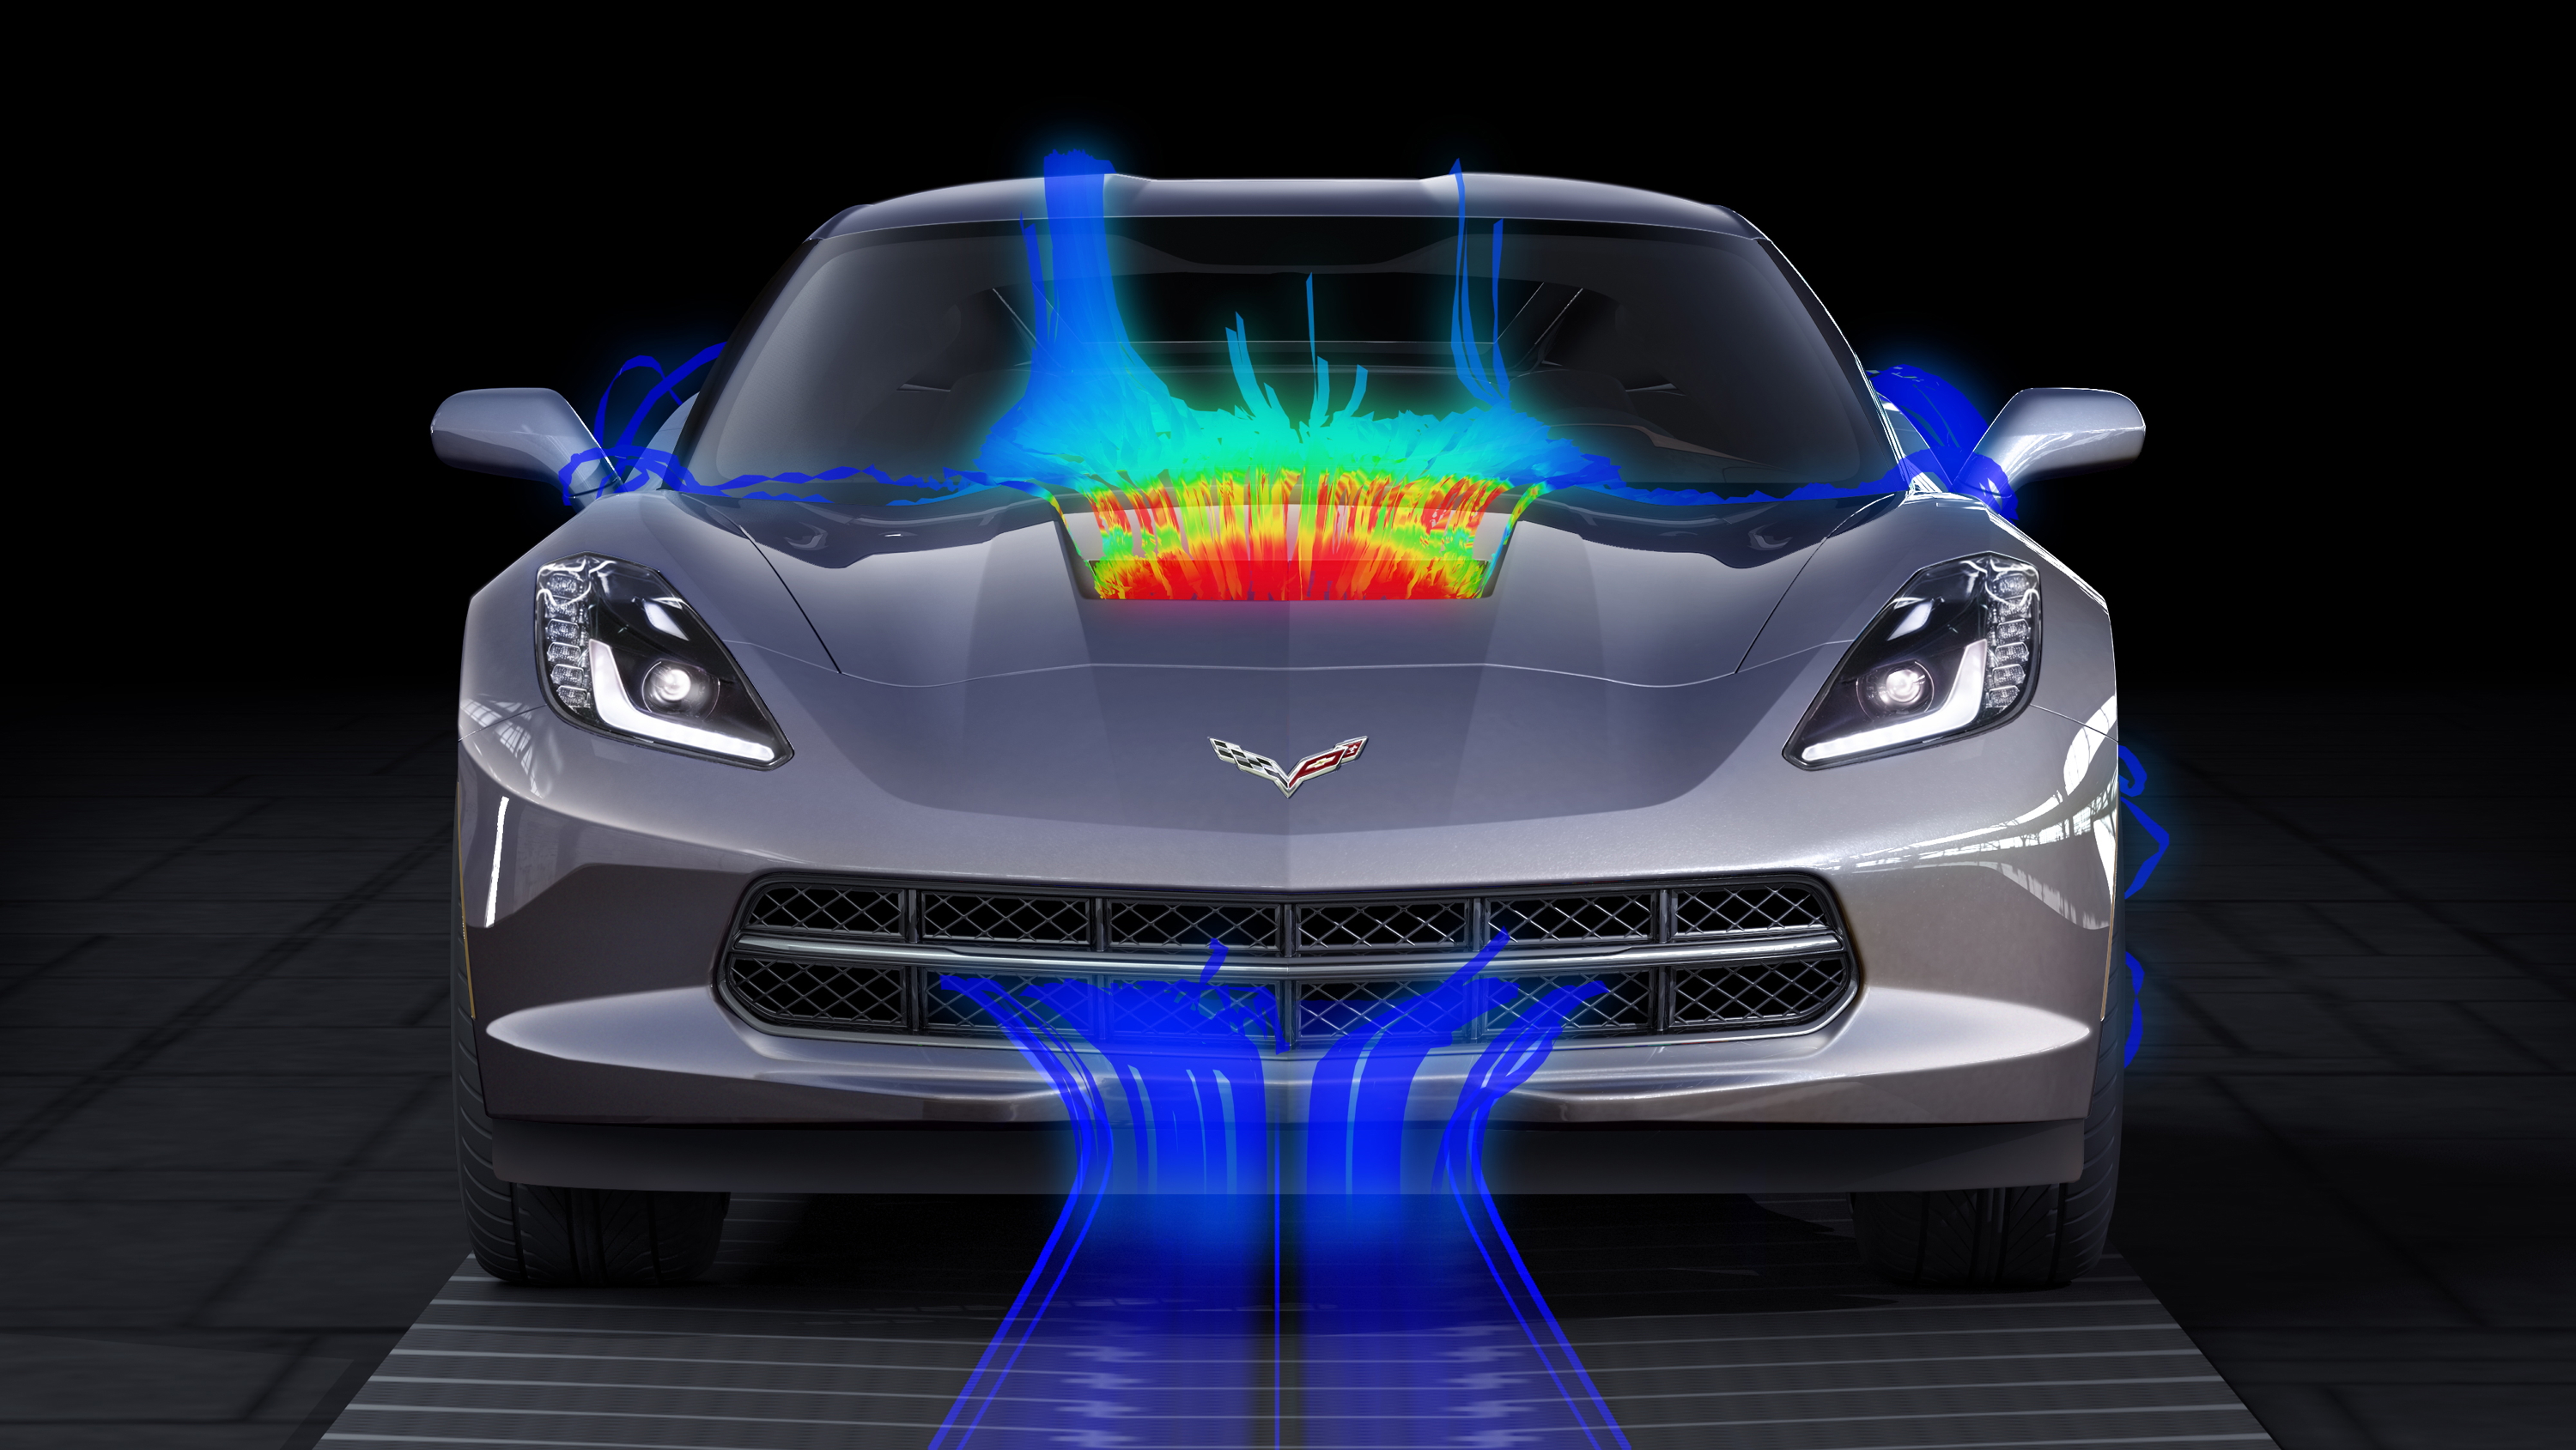 The all-new 2014 Chevrolet Corvette Stingray’s provocative exterior styling is as functional as it is elegant; every line, vent, inlet and surface has been optimized to enhance the car's overall performance.